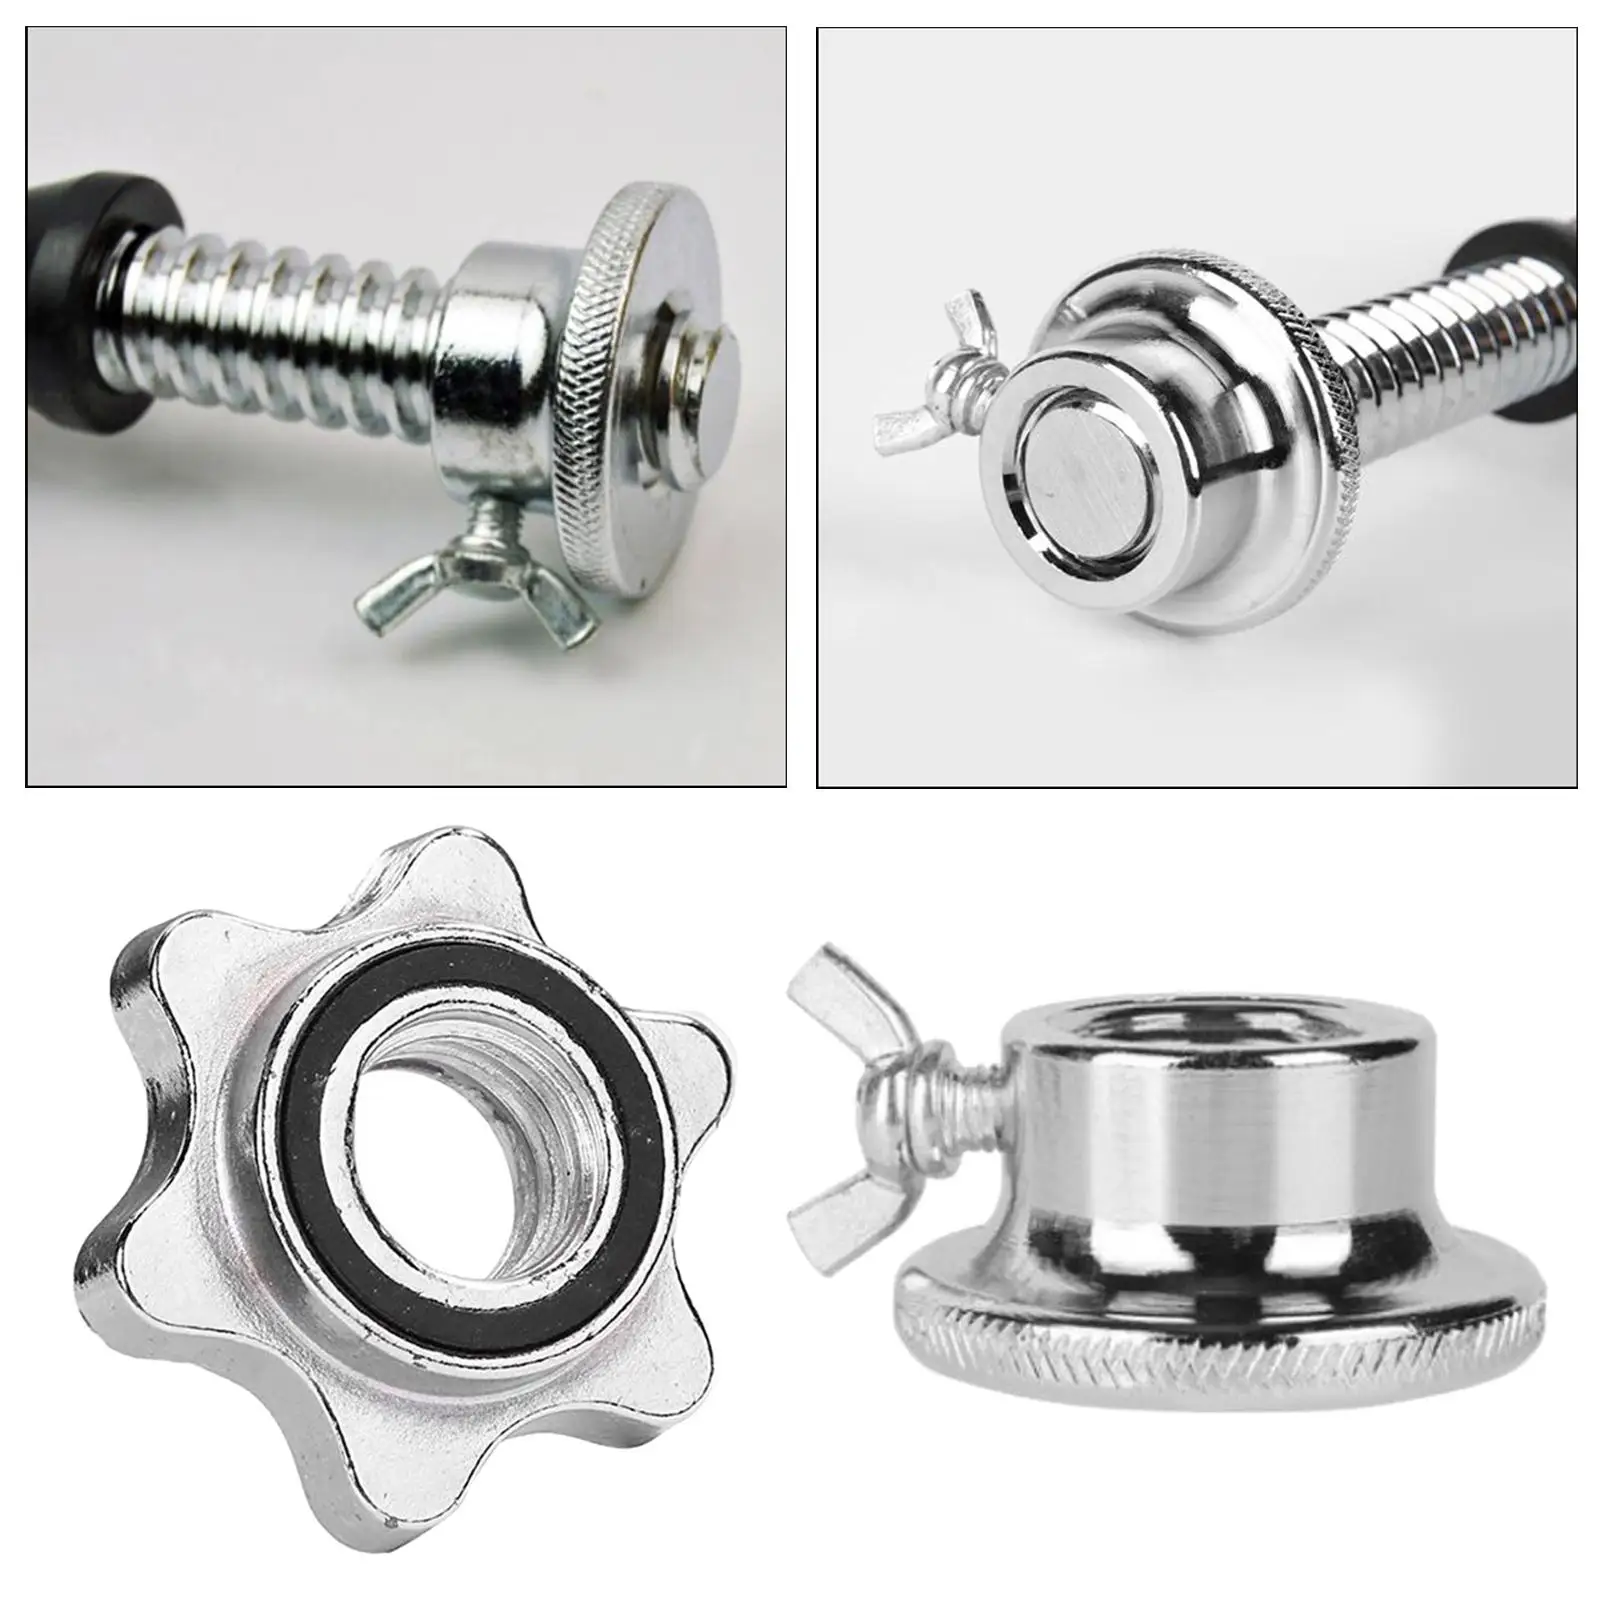 1inch Dumbbell Spin Lock Bar Hex Nut Barbells Fixed Clamps Clips Collar